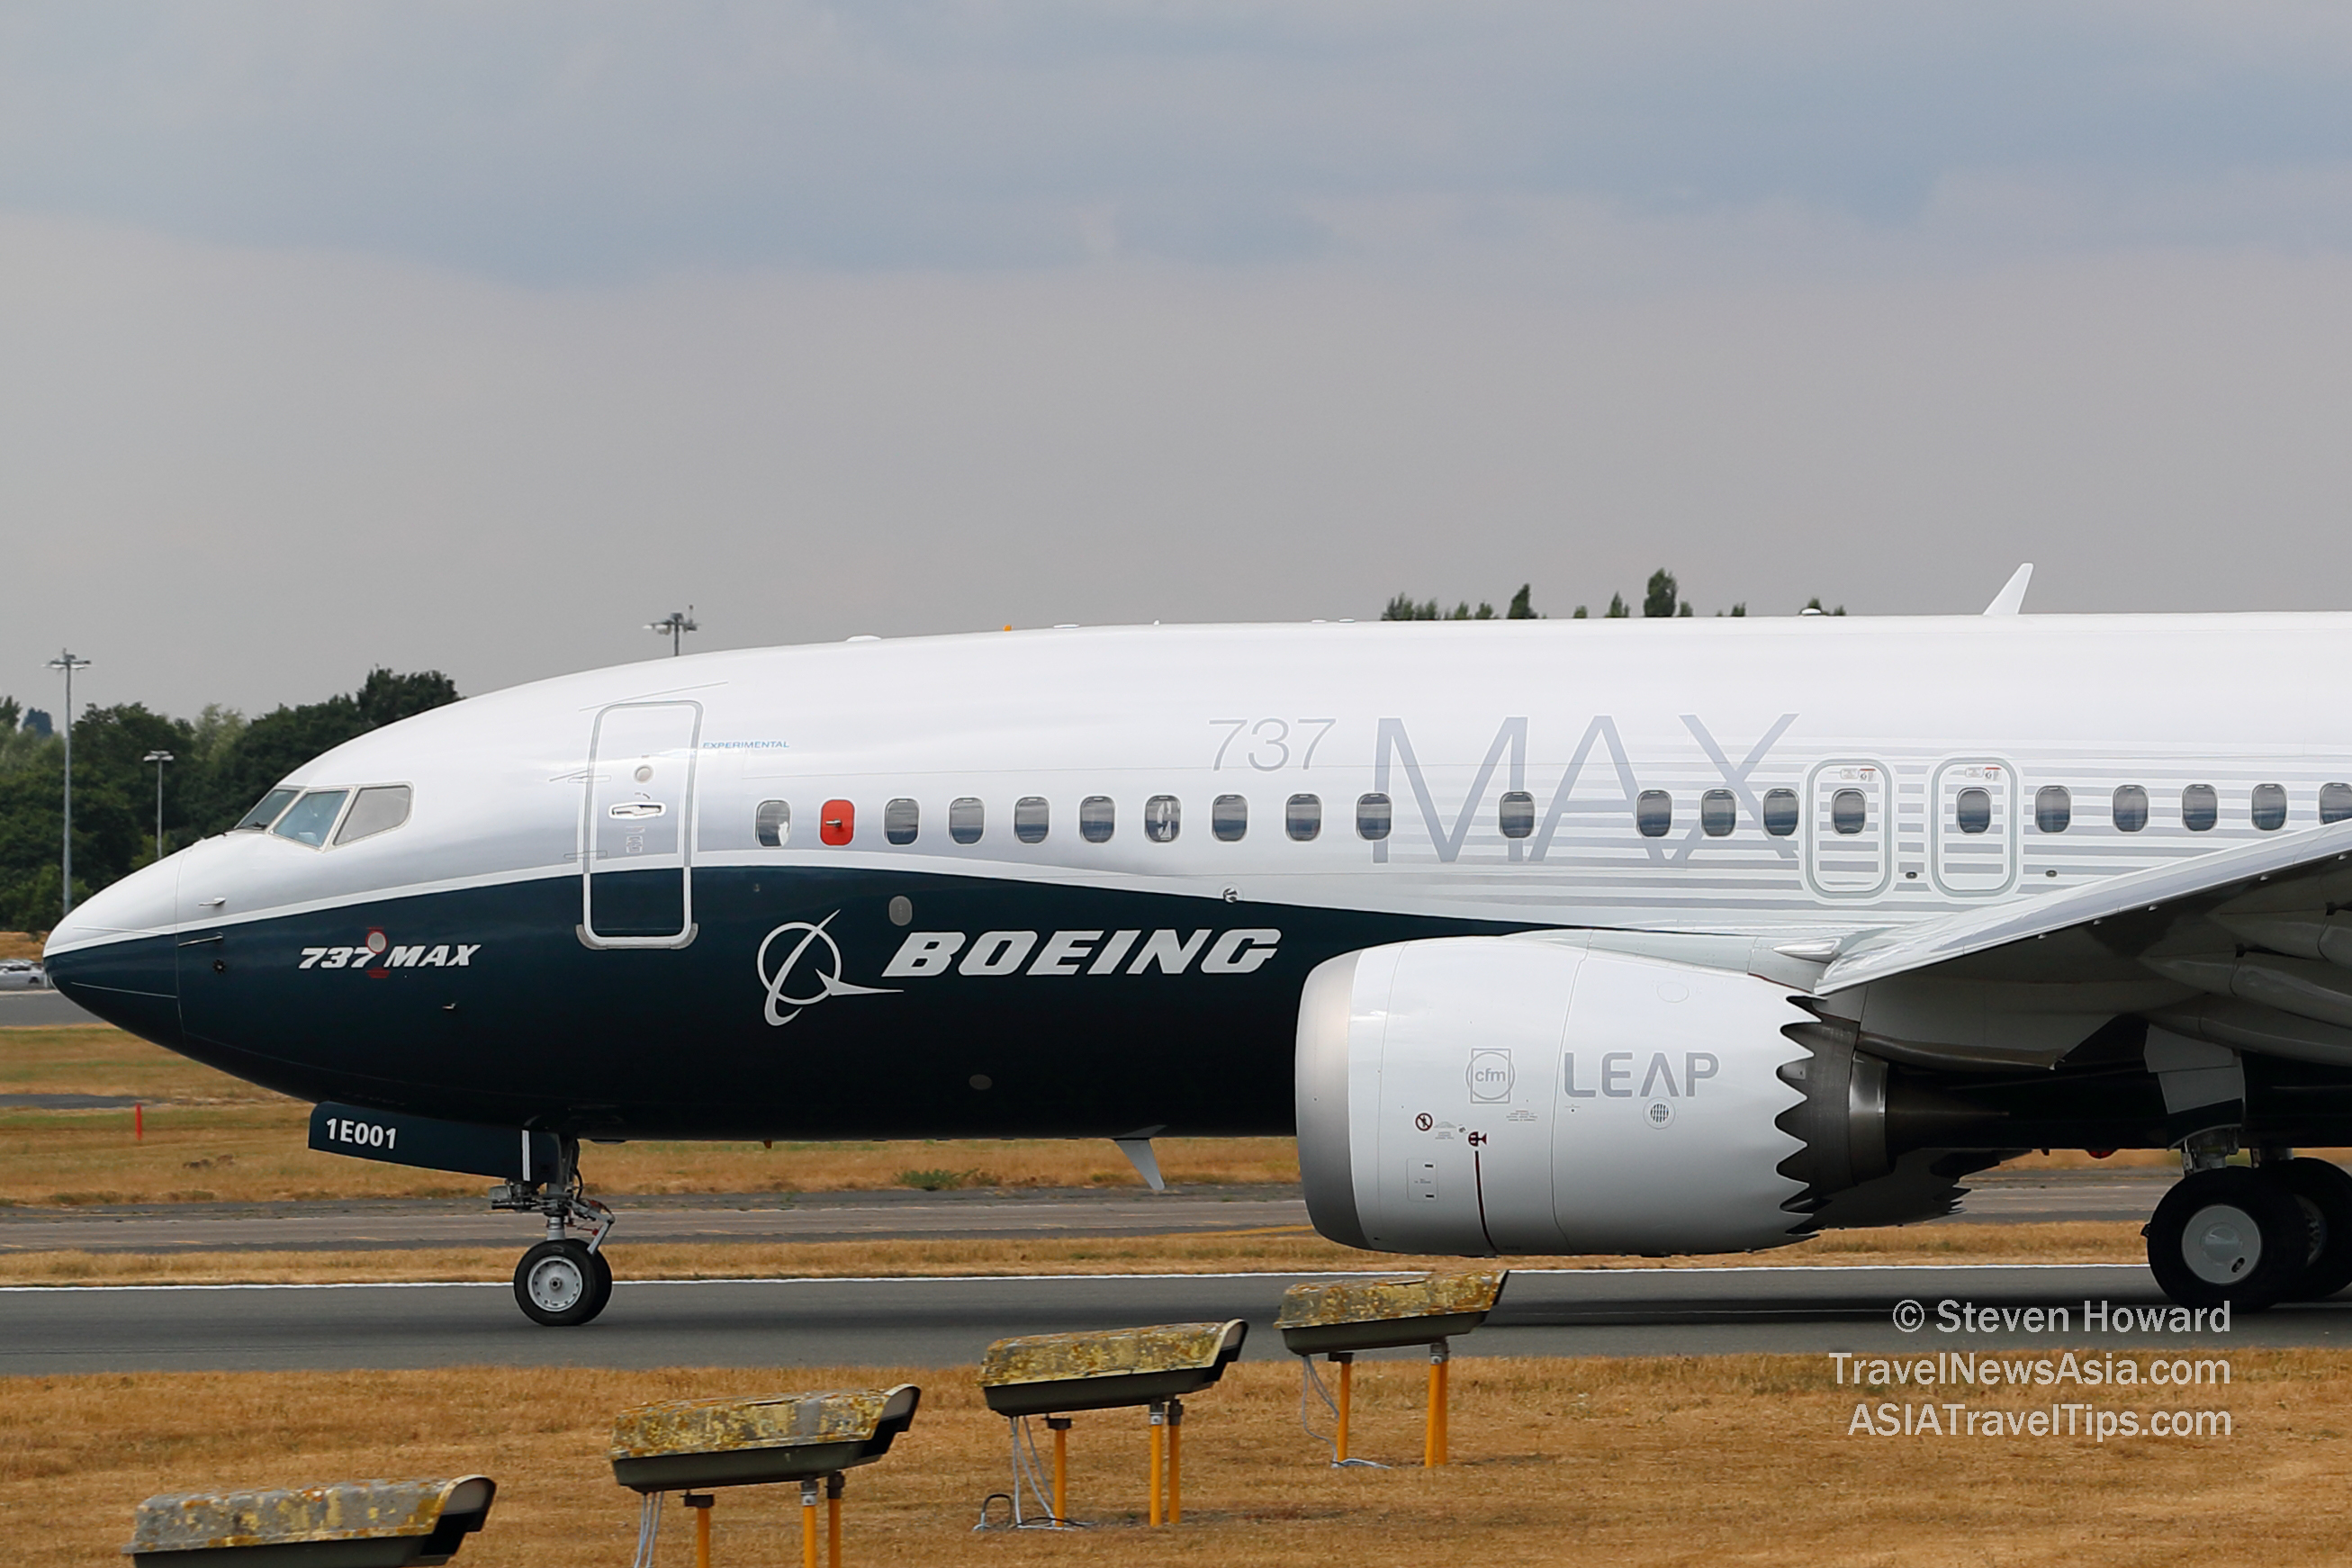 Boeing 737 MAX 7 reg: N720IS. Picture by Steven Howard of TravelNewsAsia.com Pictures from Farnborough International Airshow 2018